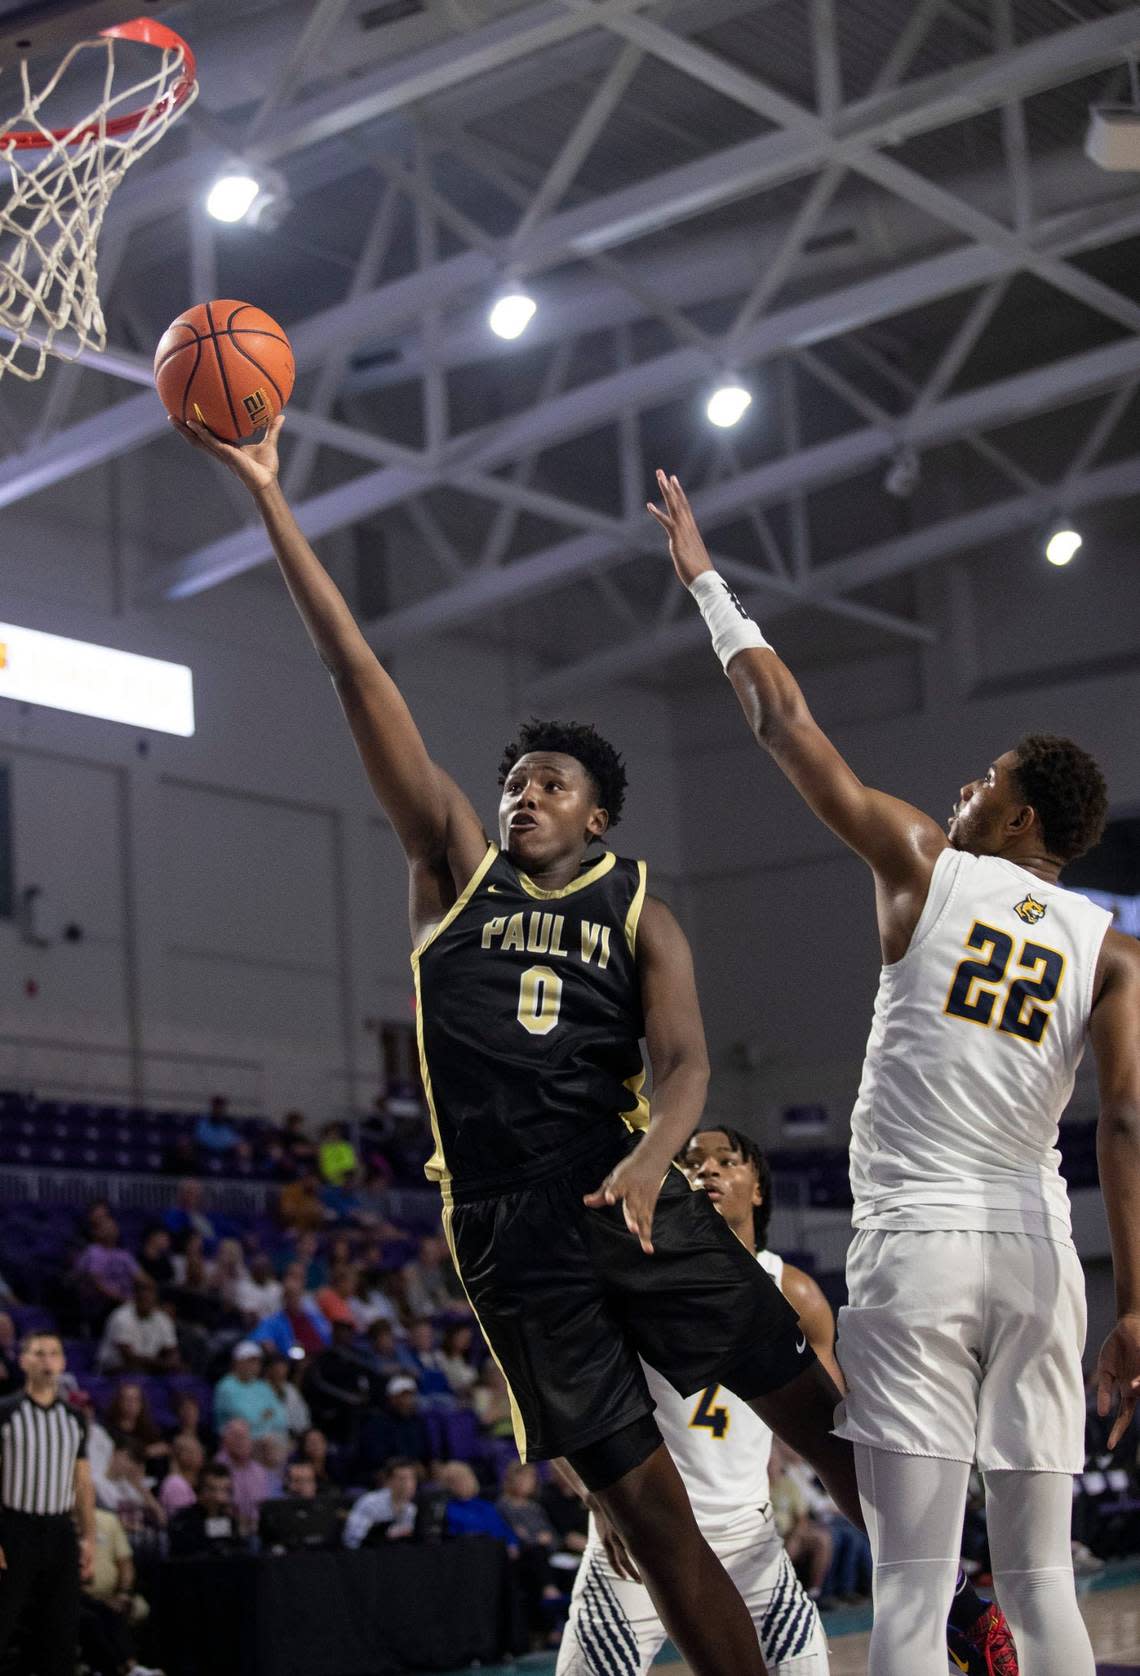 Patrick Ngongba goes up for a shot during the City of Palms Classic third-place game on Wednesday, Dec. 21, 2022, at Suncoast Credit Union Arena in Fort Myers. Ngongba made his college commitment Saturday. Amanda Inscore/USA Today Network